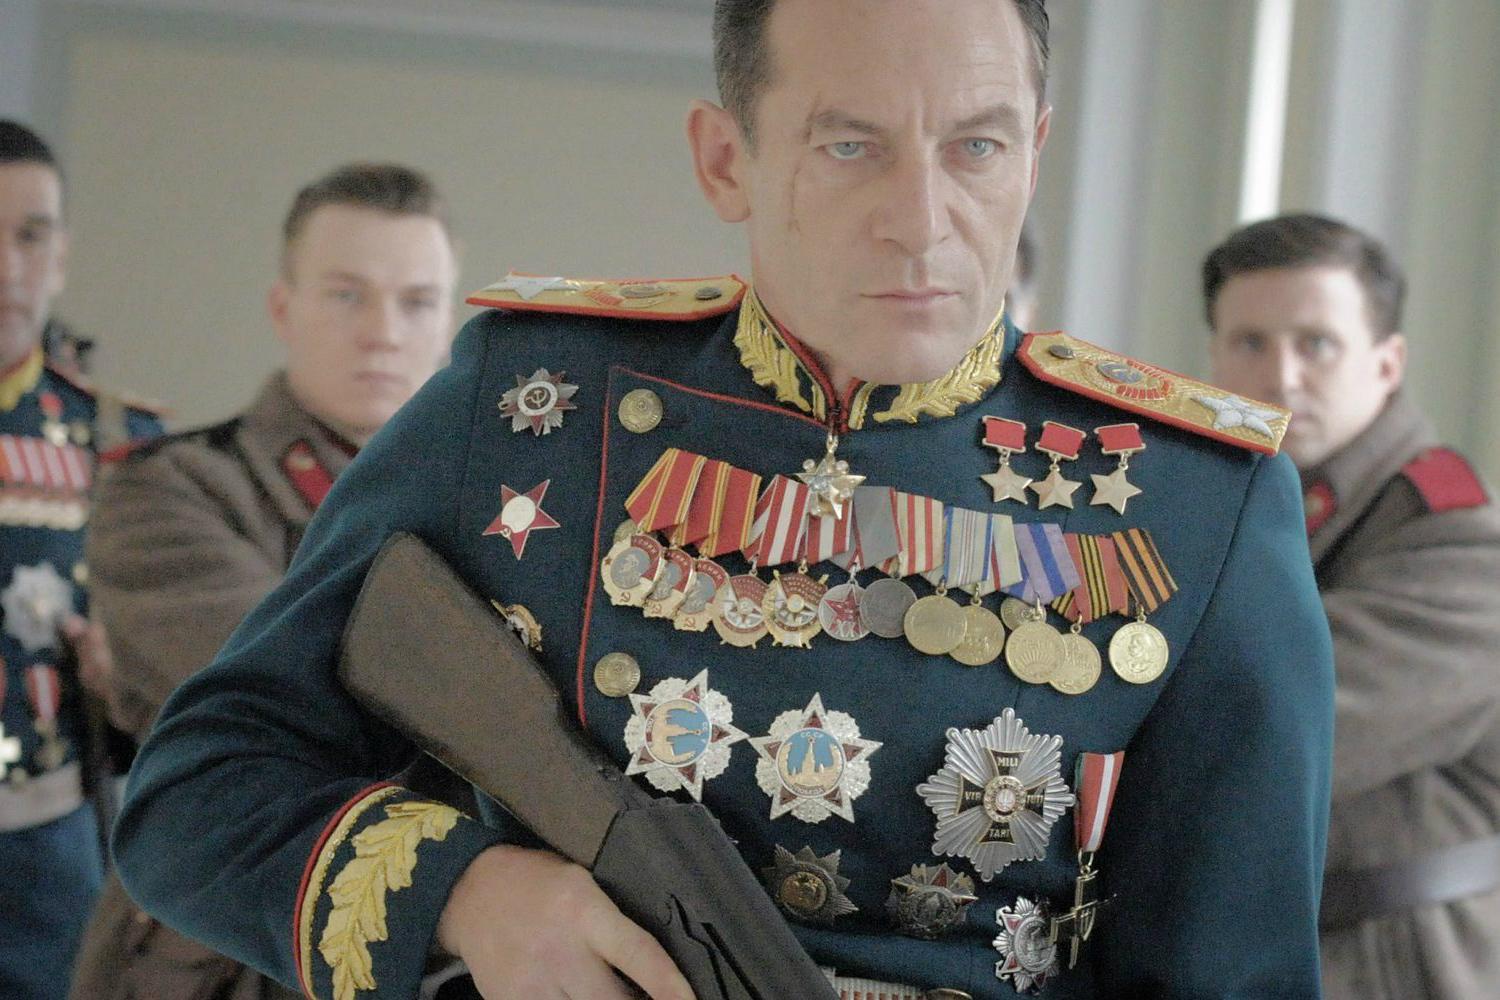 Jason Isaacs appearing in a cameo as military hero Marshal Zhukov